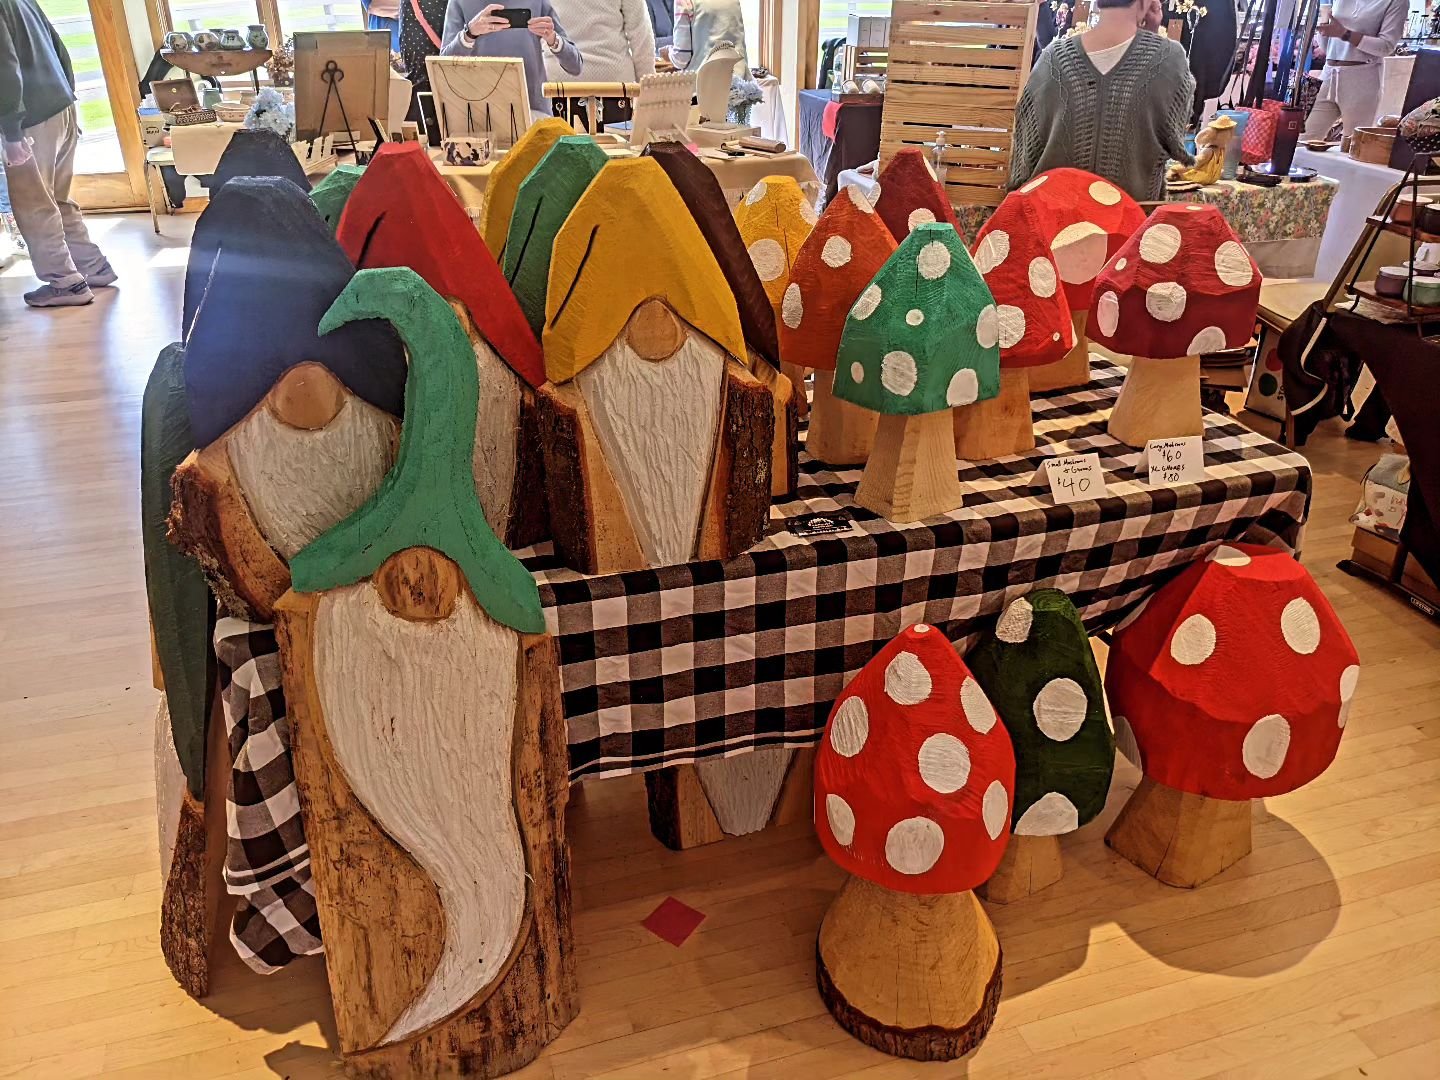 Mushies and gnomes for sale at the Scandinavian Club on Fairfield CT through 4pm today!